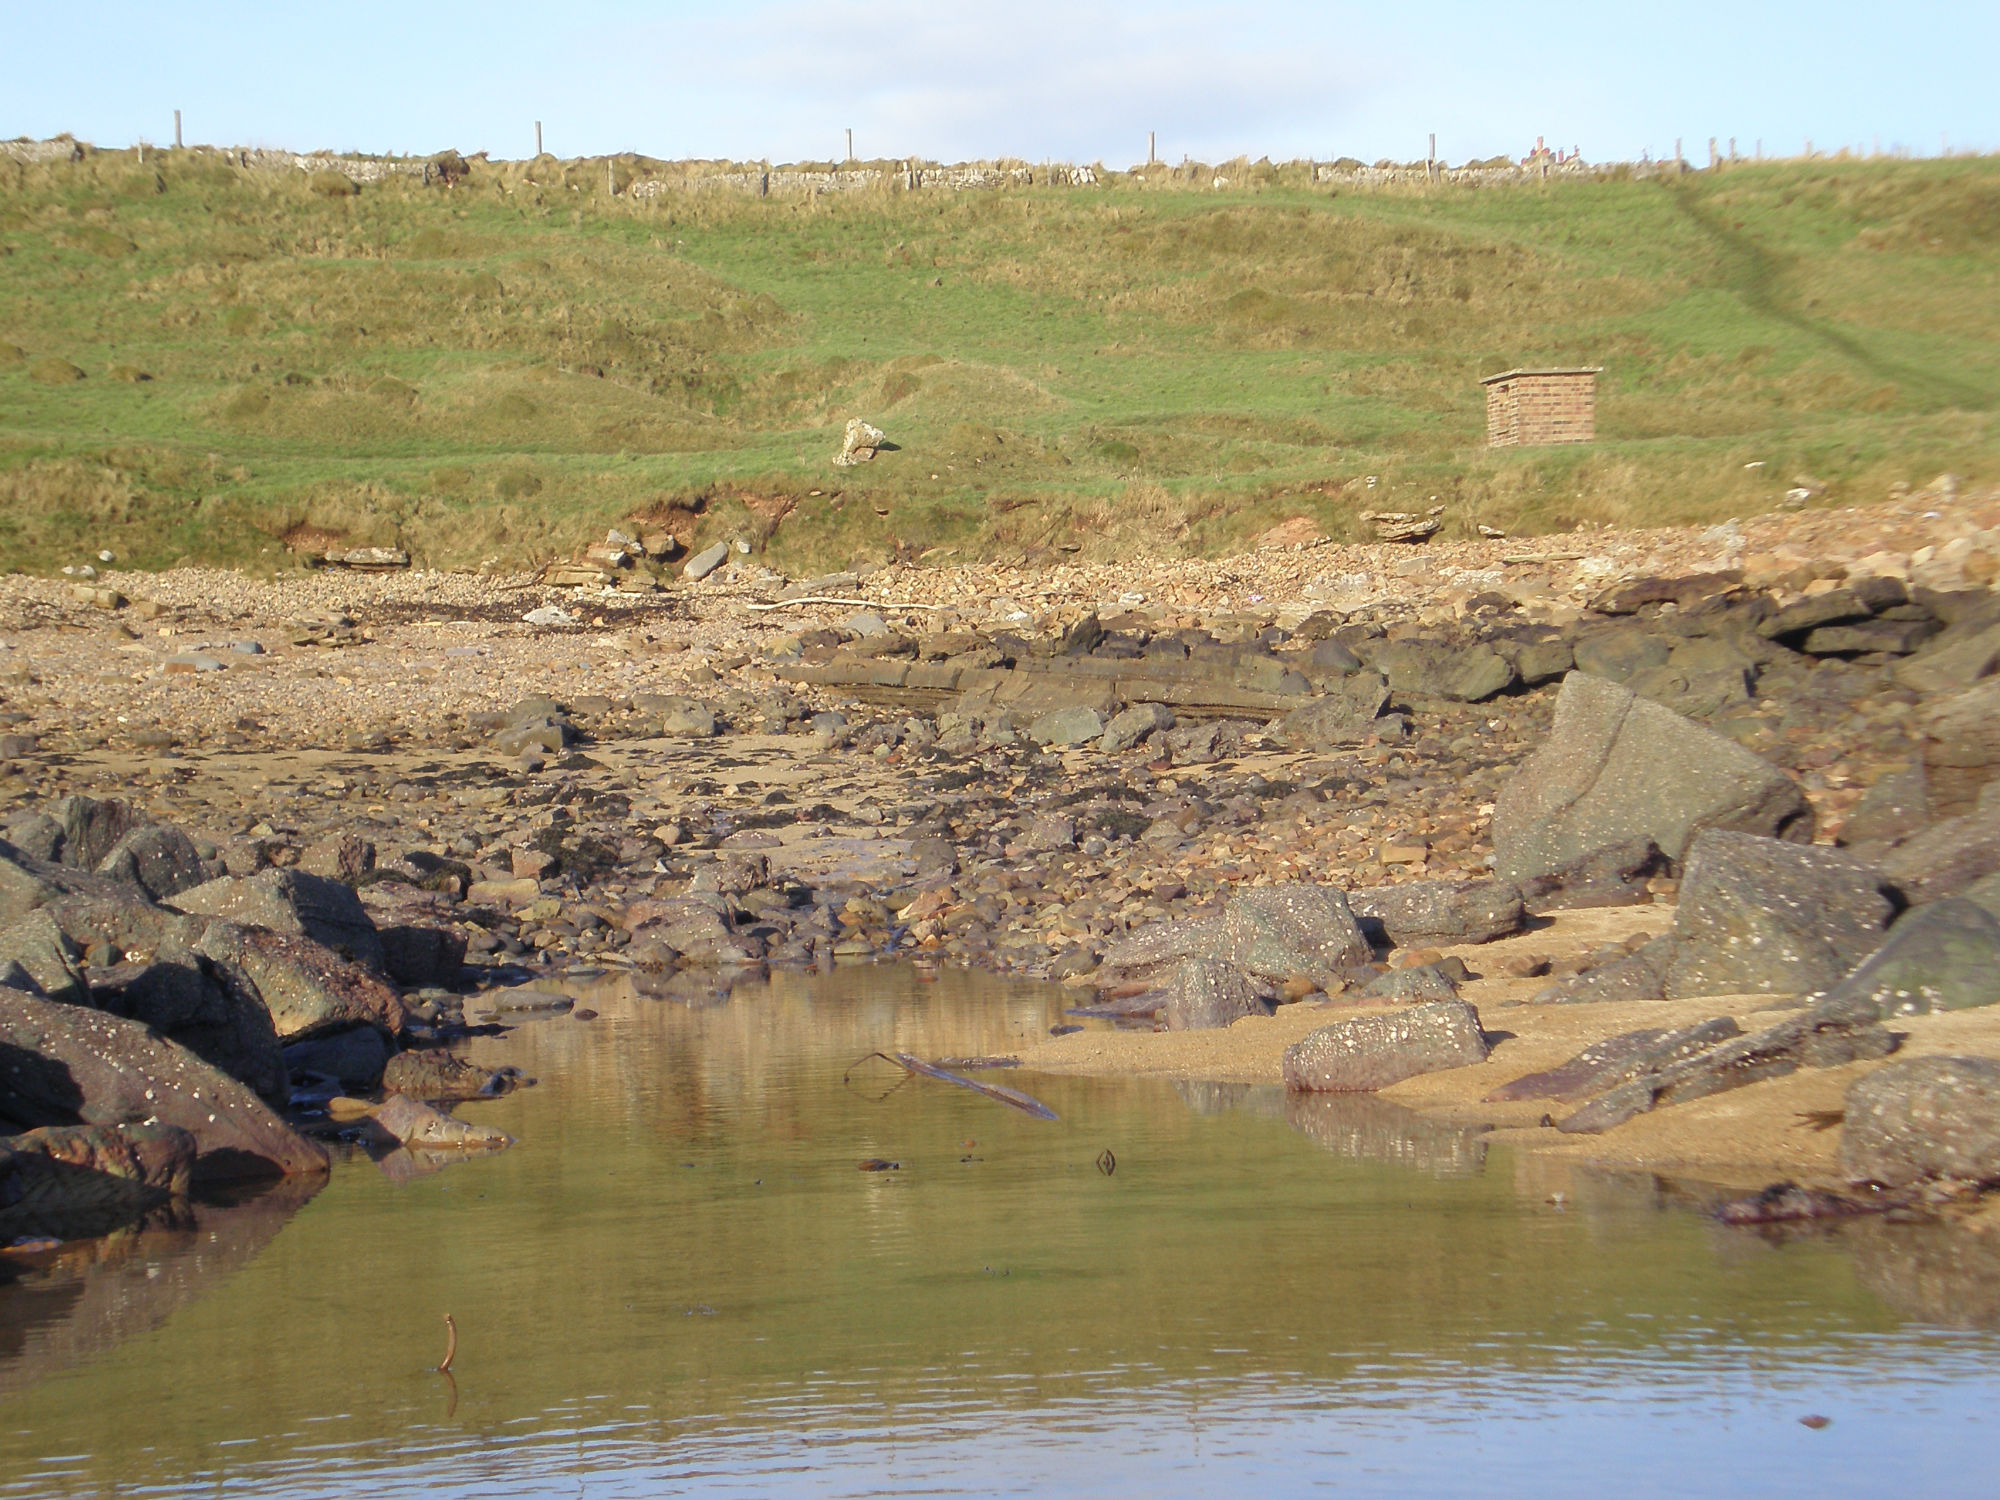 View from shore showing relationship with indicator loops, WW2 earthworks in background [1484] looking NW